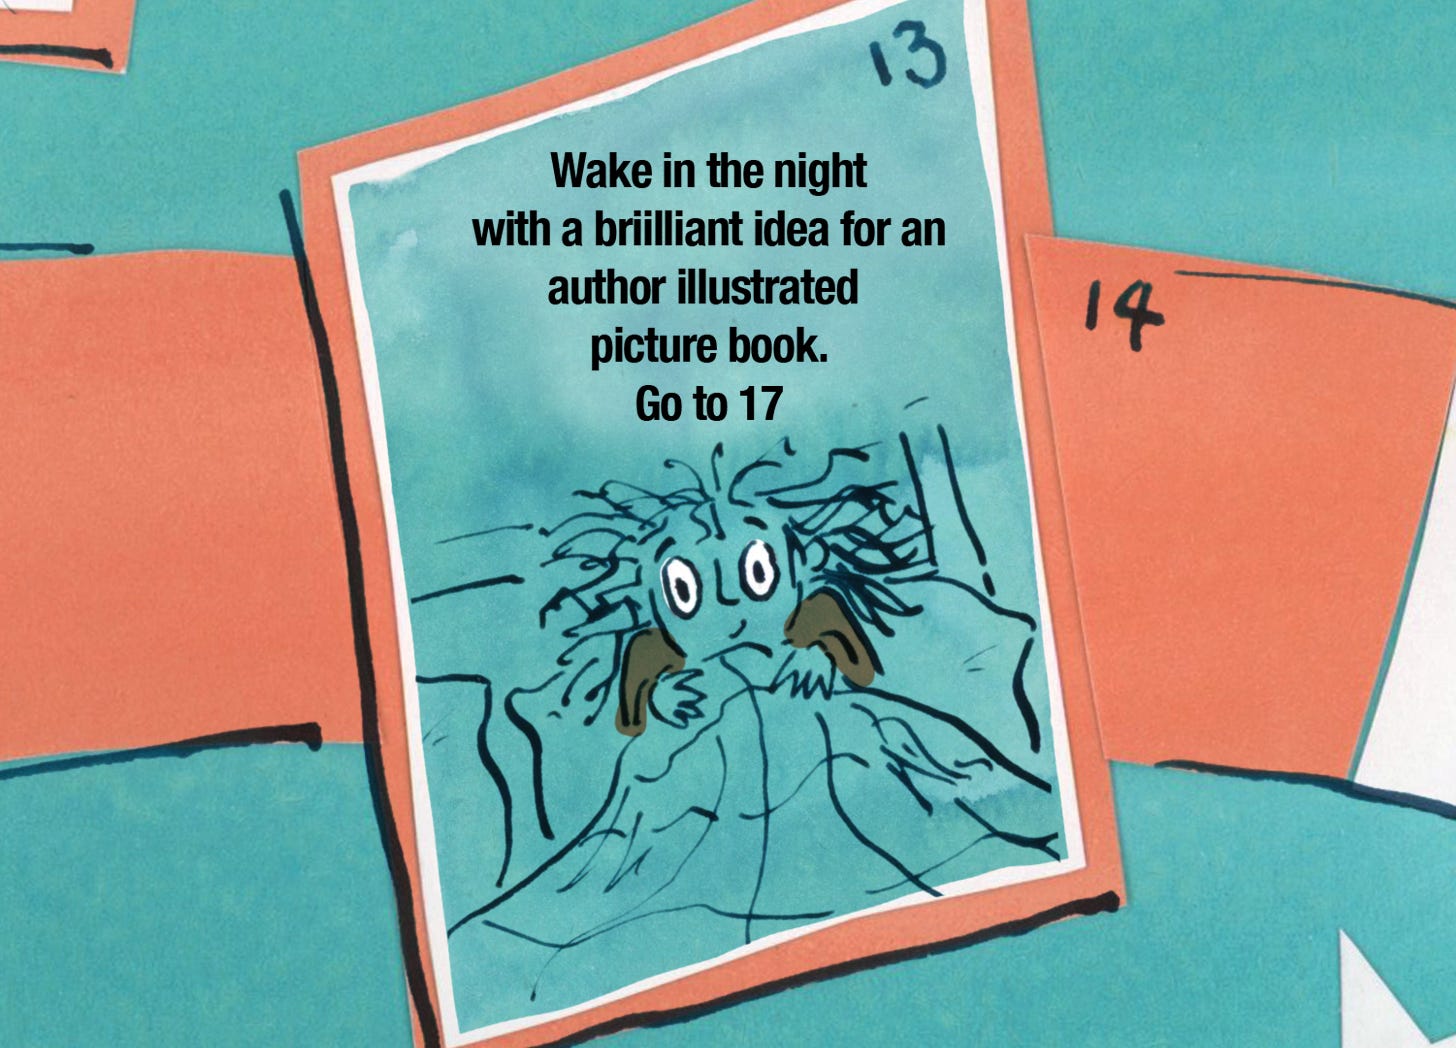 detail image of a board game square. A wide eyed figure sitting up in bed with caption: Wake in the night with a brilliant idea for an author illustrated picture book. Go to 17